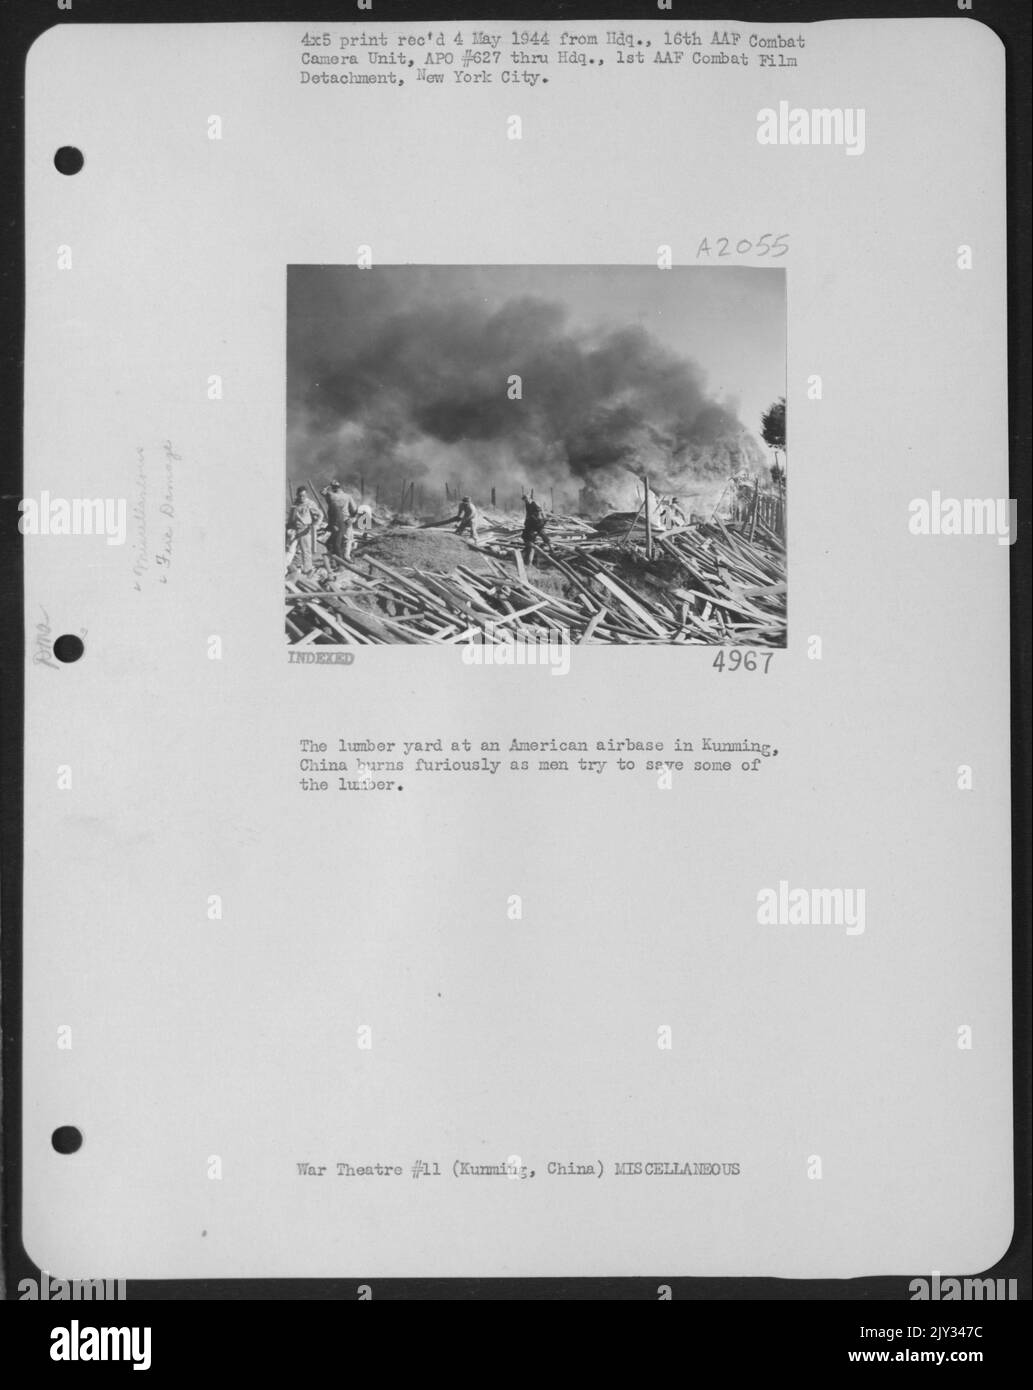 The Lumber Yard At An American Airbase In Kunming, China Burns Furiously As Men Try To Save Some Of The Lumber. Stock Photo